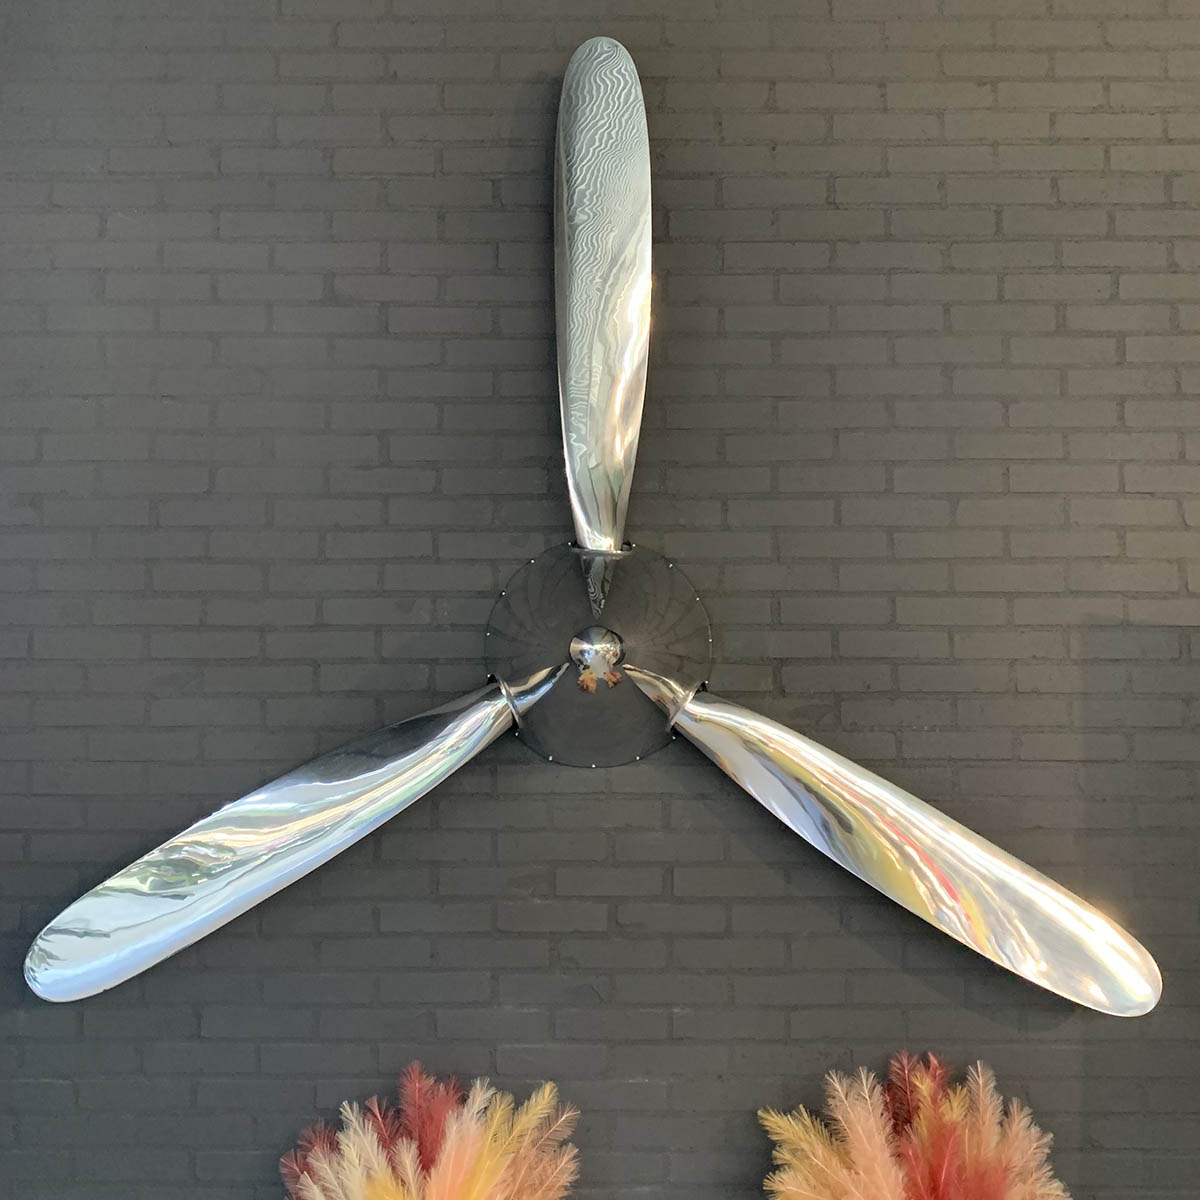 Polished Hartzell propellers and spinner hanging on a brick wall in Kaeve.